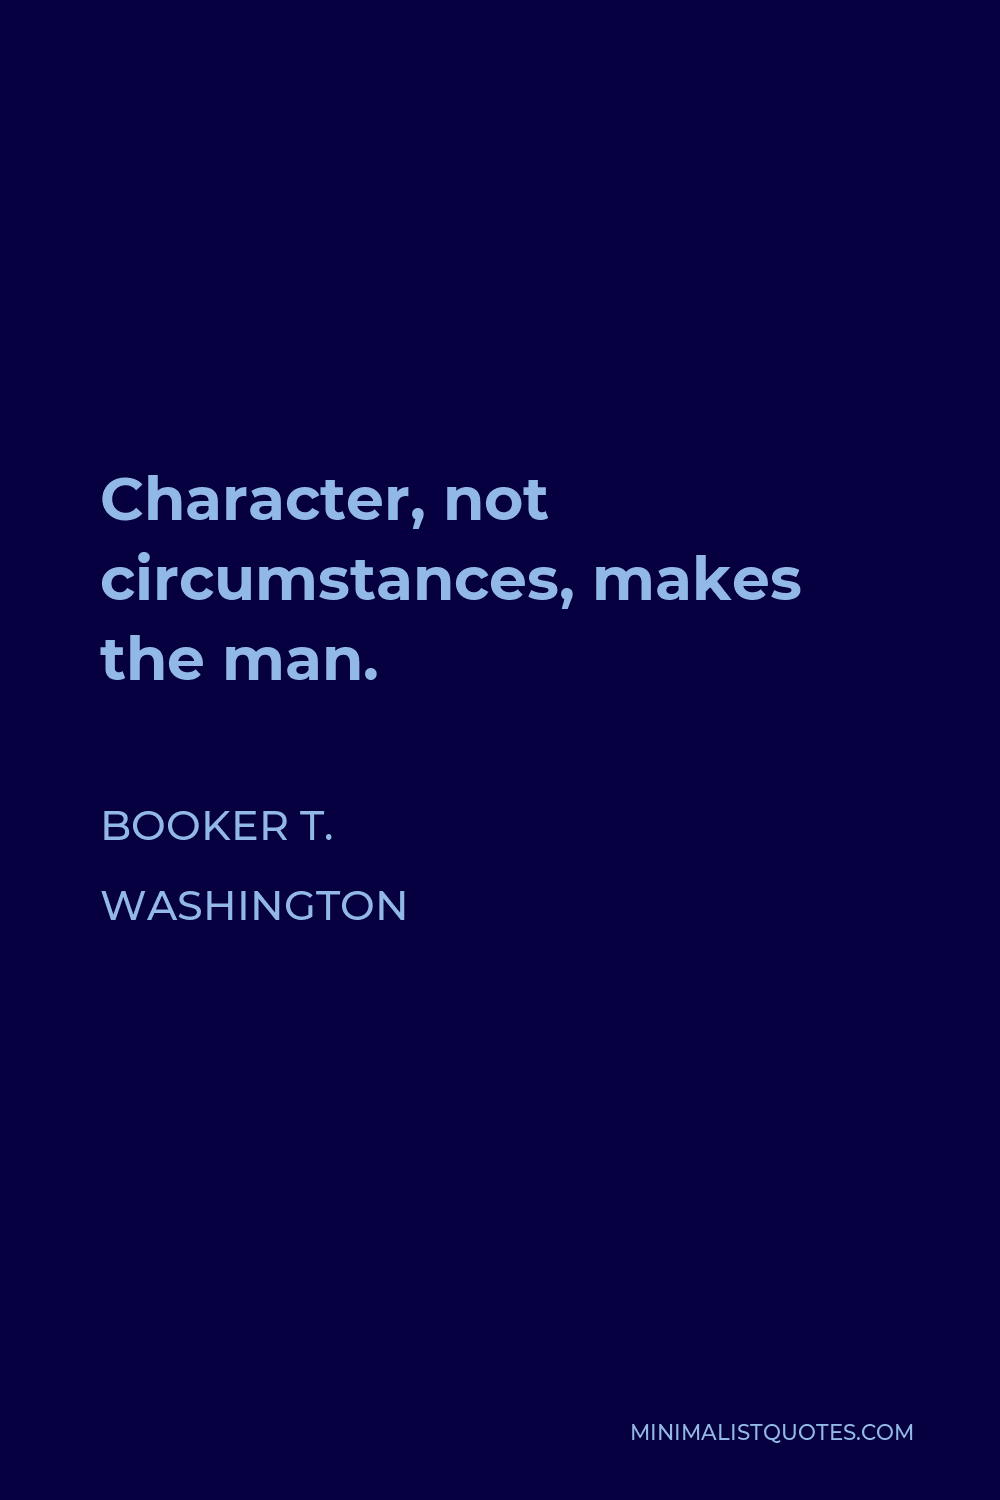 Booker T. Washington Quote - Character, not circumstances, makes the man.